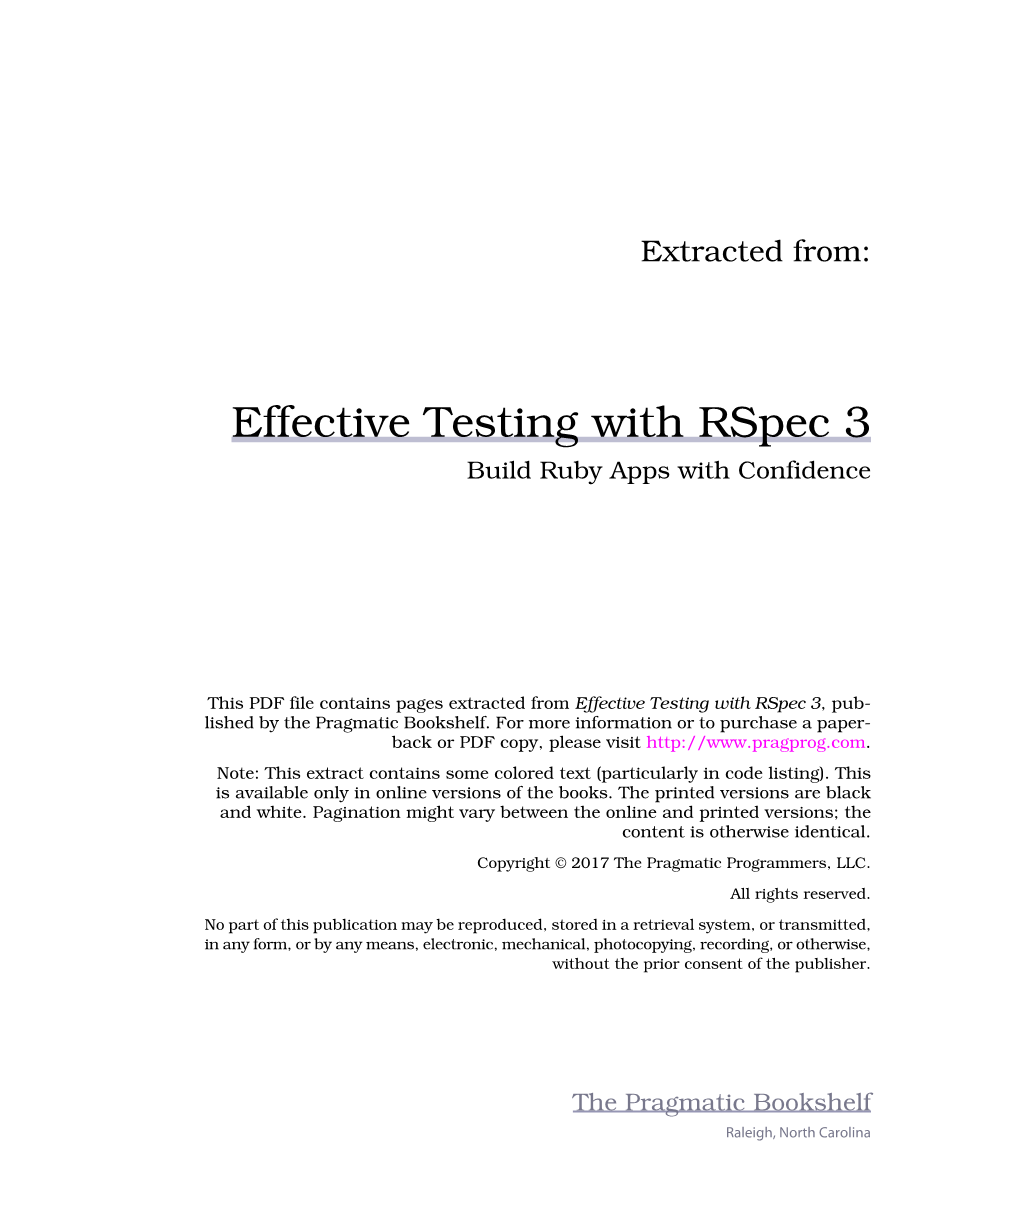 Effective Testing with Rspec 3 Build Ruby Apps with Confidence